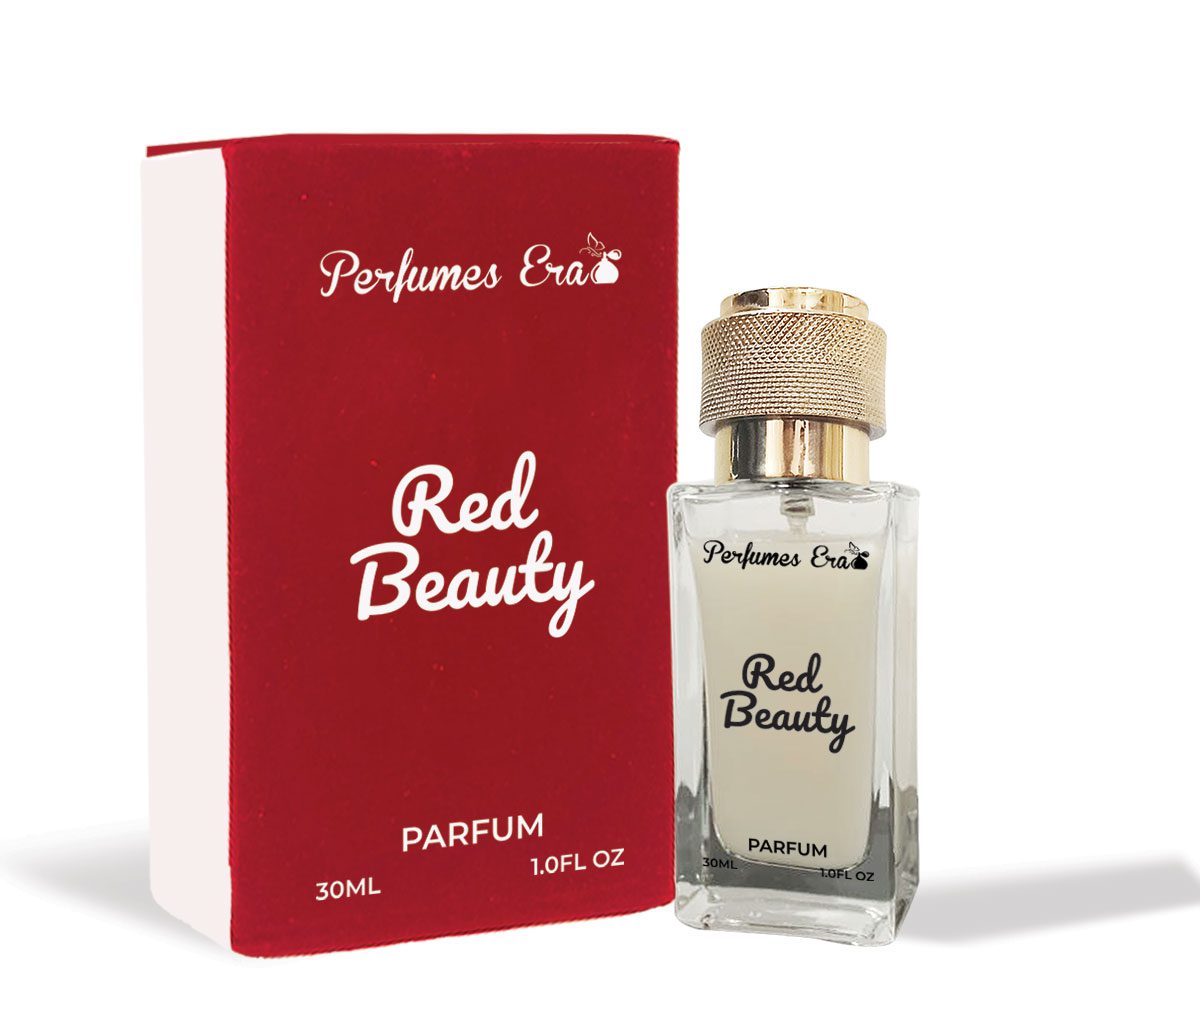 A red beauty perfume bottle sitting next to its box.